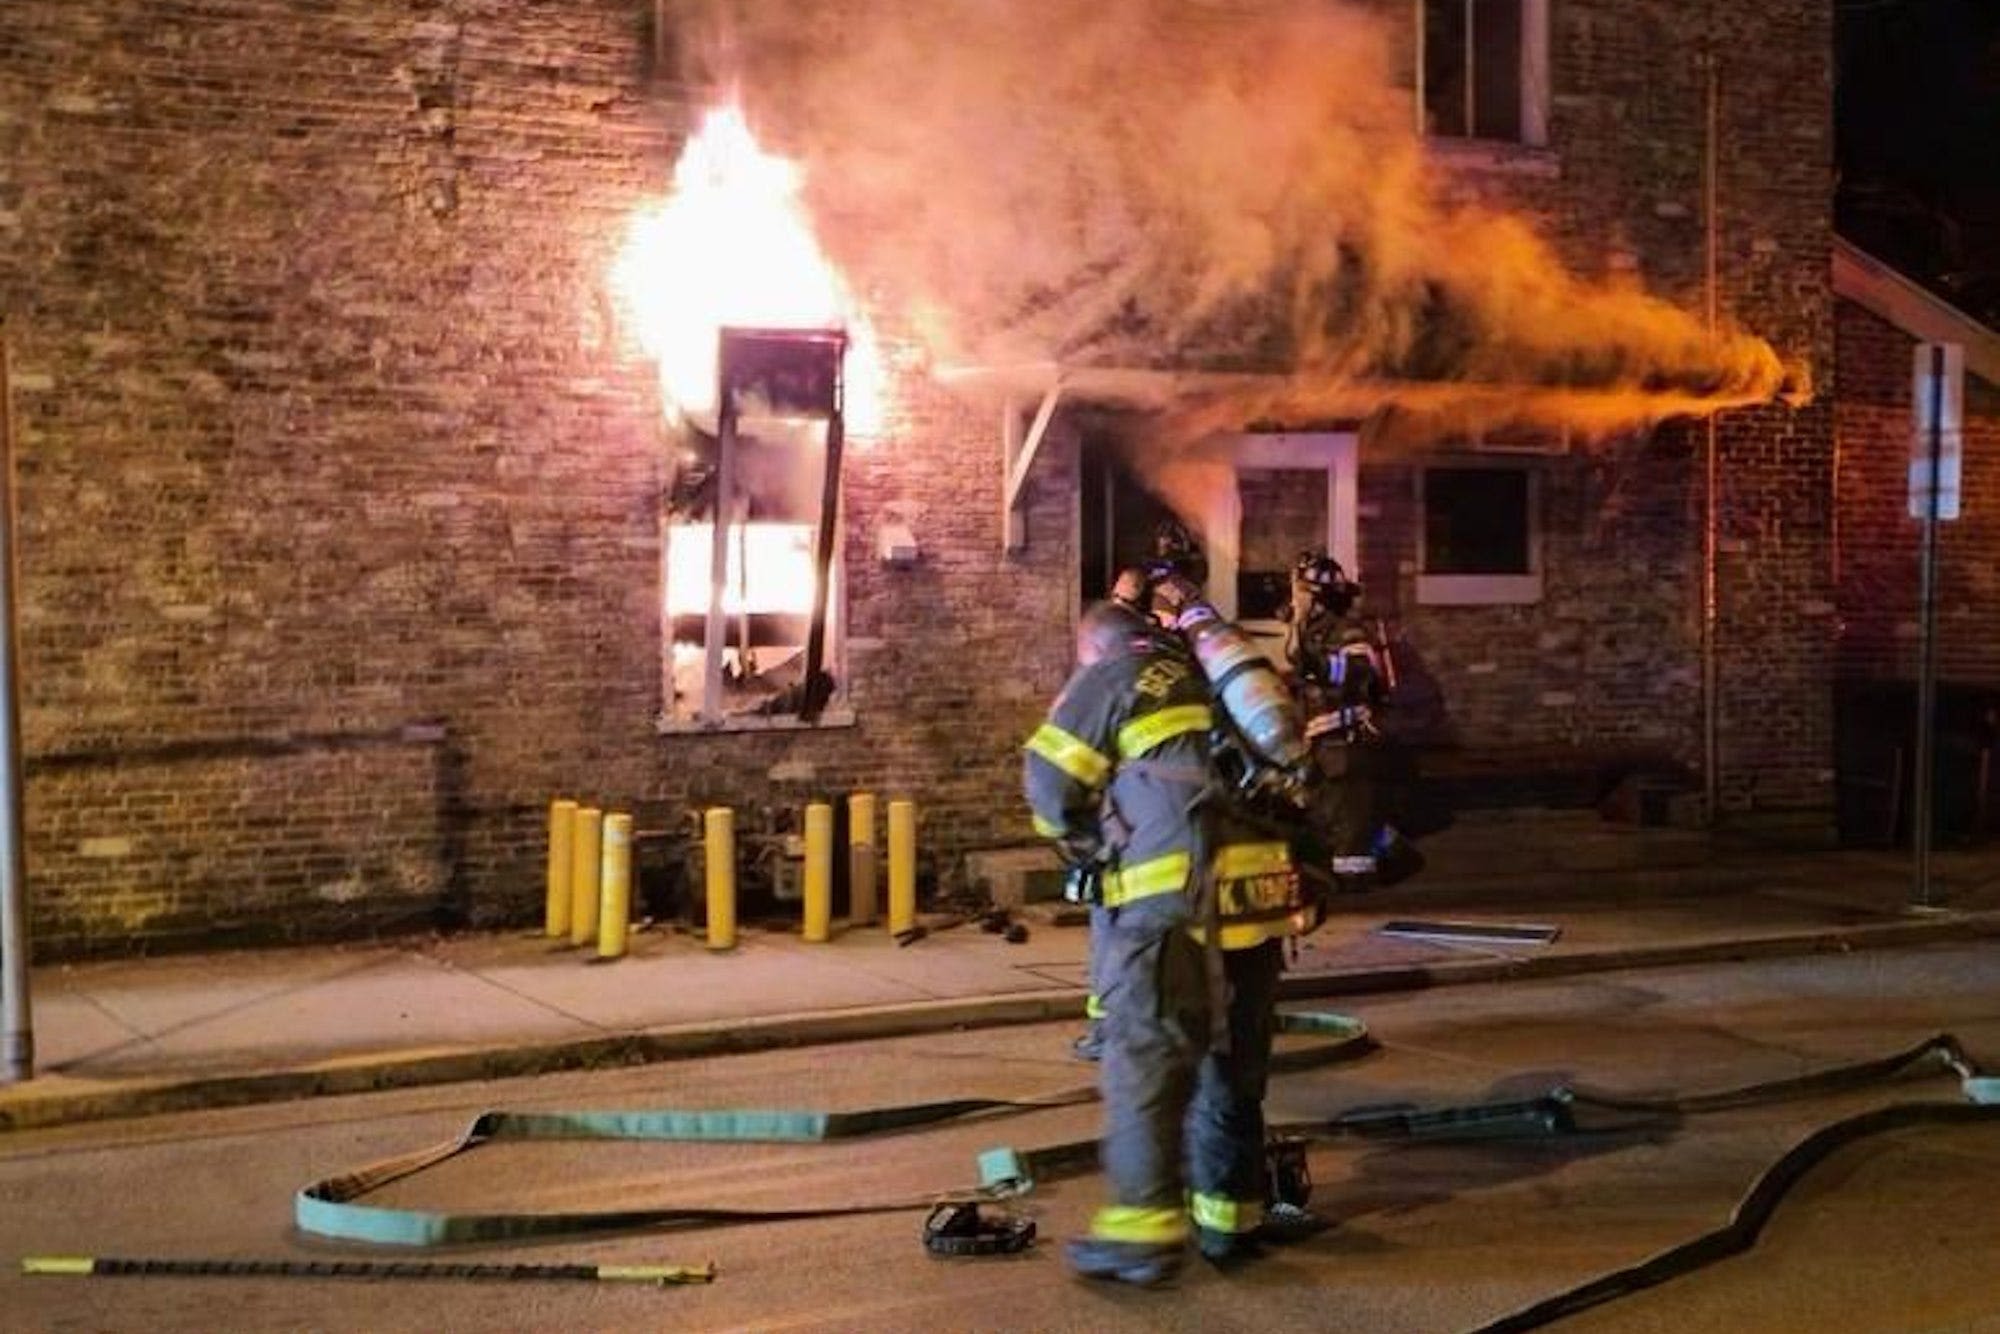 Three displaced after fire in downtown Gettysburg early Tuesday